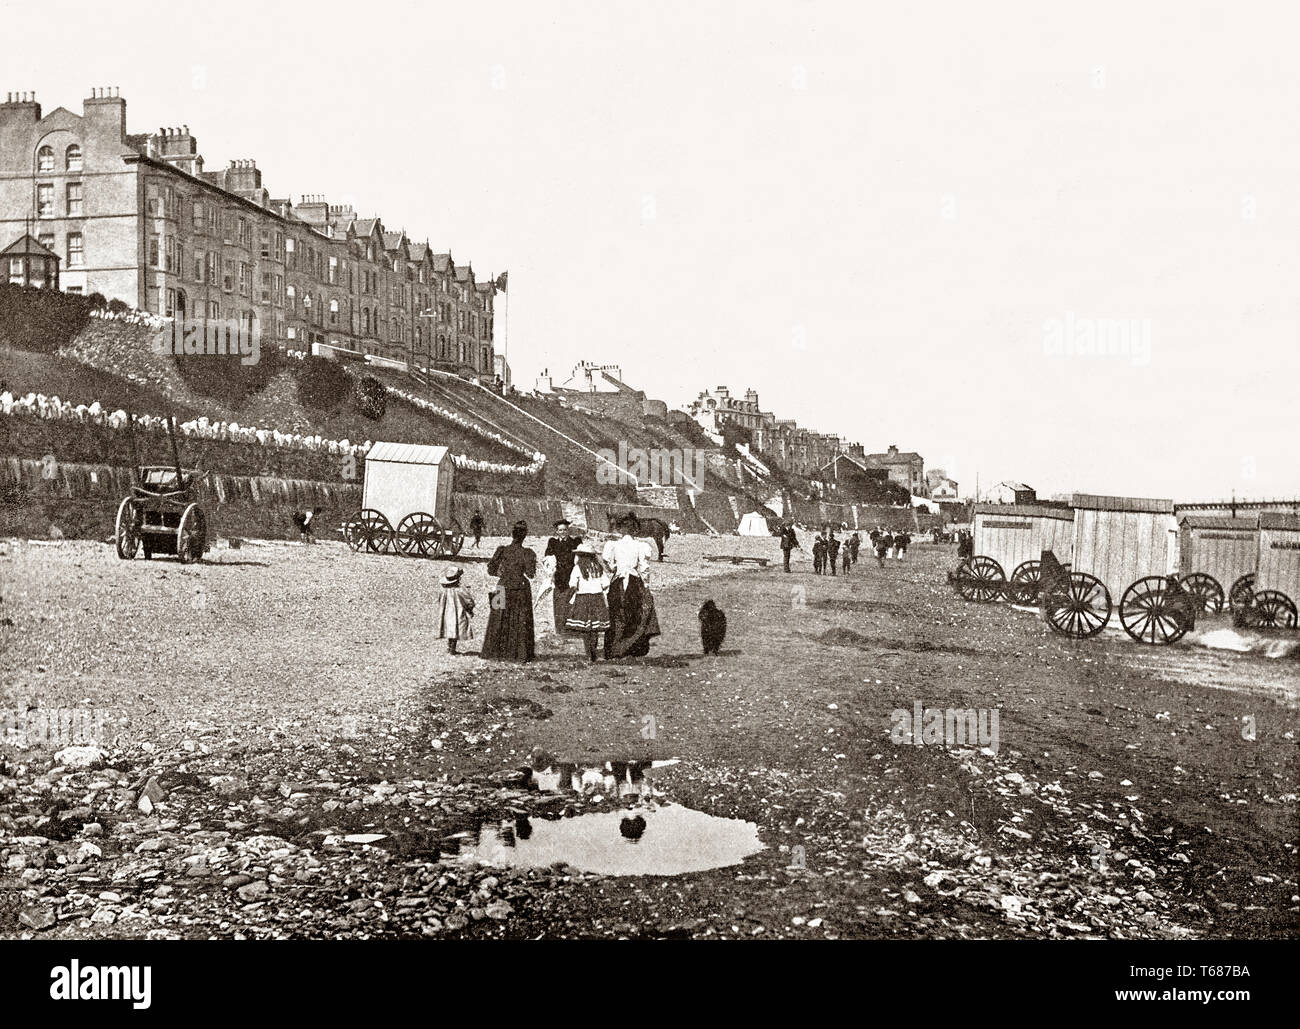 A 19th Century view of Victorian bathing machines on the beach at Ramsey, a coastal town in the north of the Isle of Man, a self-governing British Crown dependency in the Irish Sea between Great Britain and Ireland.  It is the second largest town on the island after Douglas. It's  also known as 'Royal Ramsey' due to royal visits by Queen Victoria and Prince Albert in 1847 and by King Edward VII and Queen Alexandra in 1902. Stock Photo